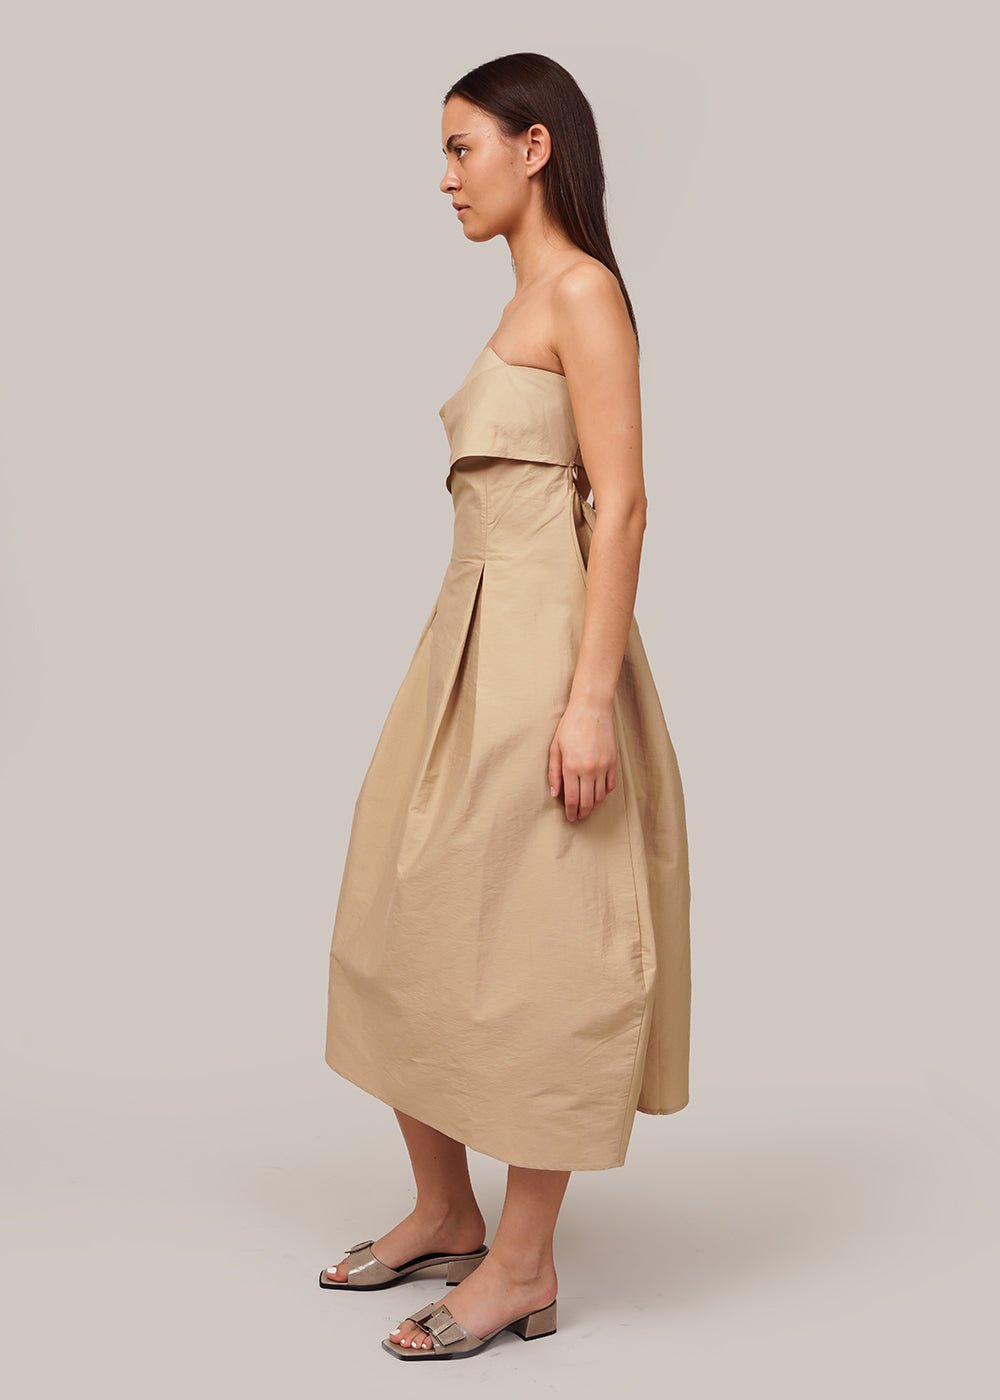 Strapless Dress in Toasted by CORDERA – New Classics Studios